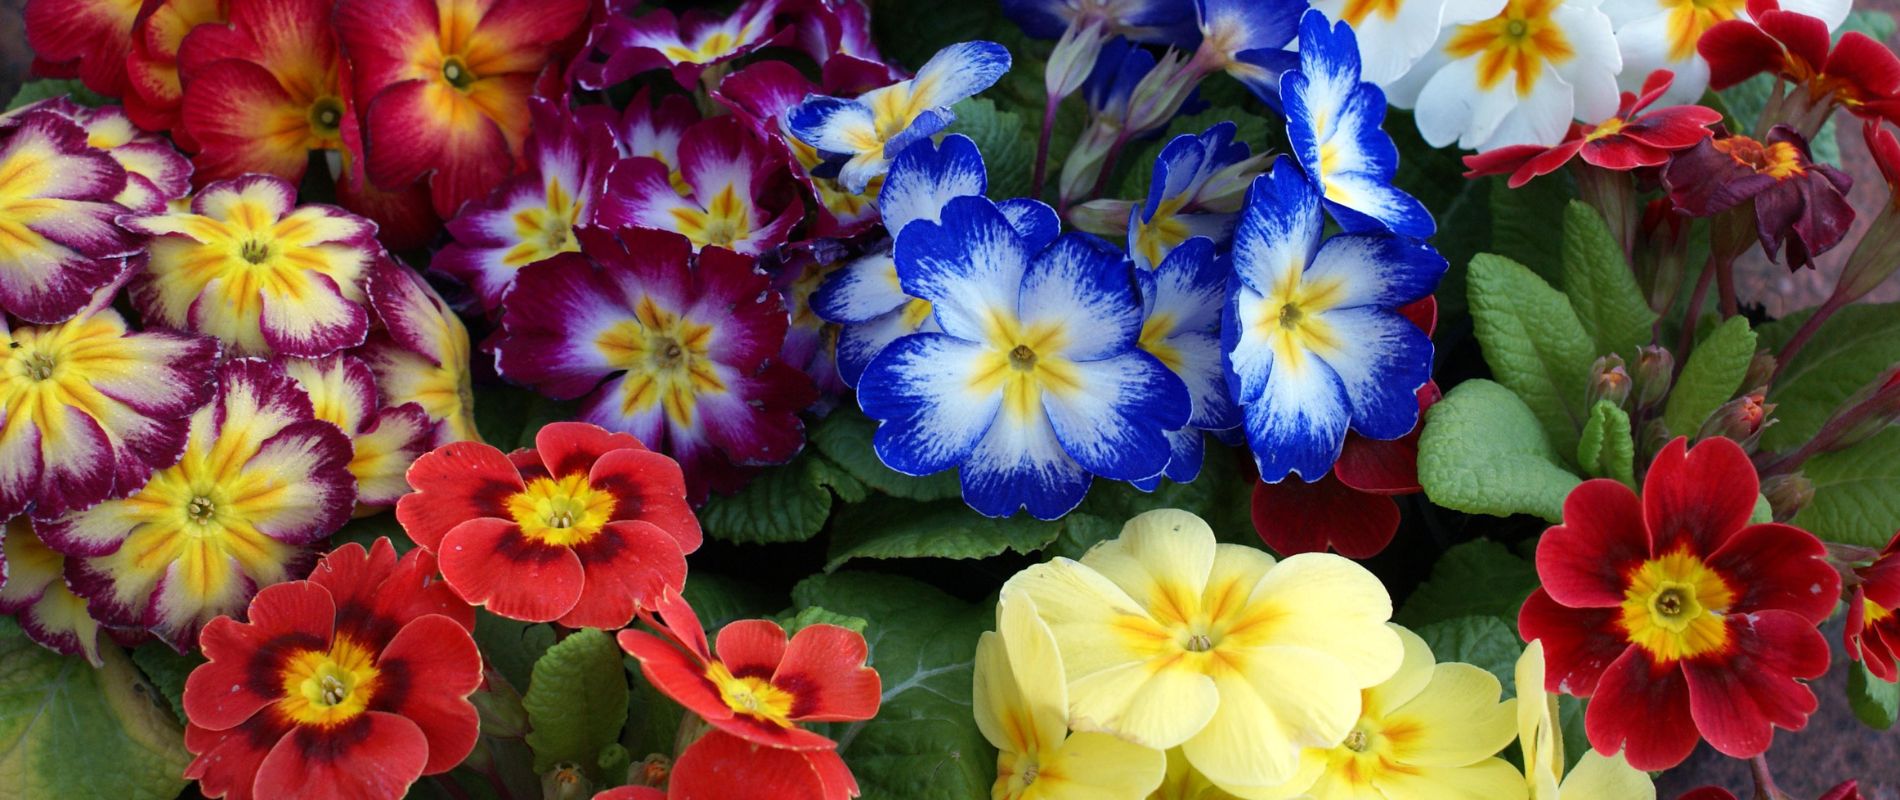 Time To Add Some Color With Primroses!